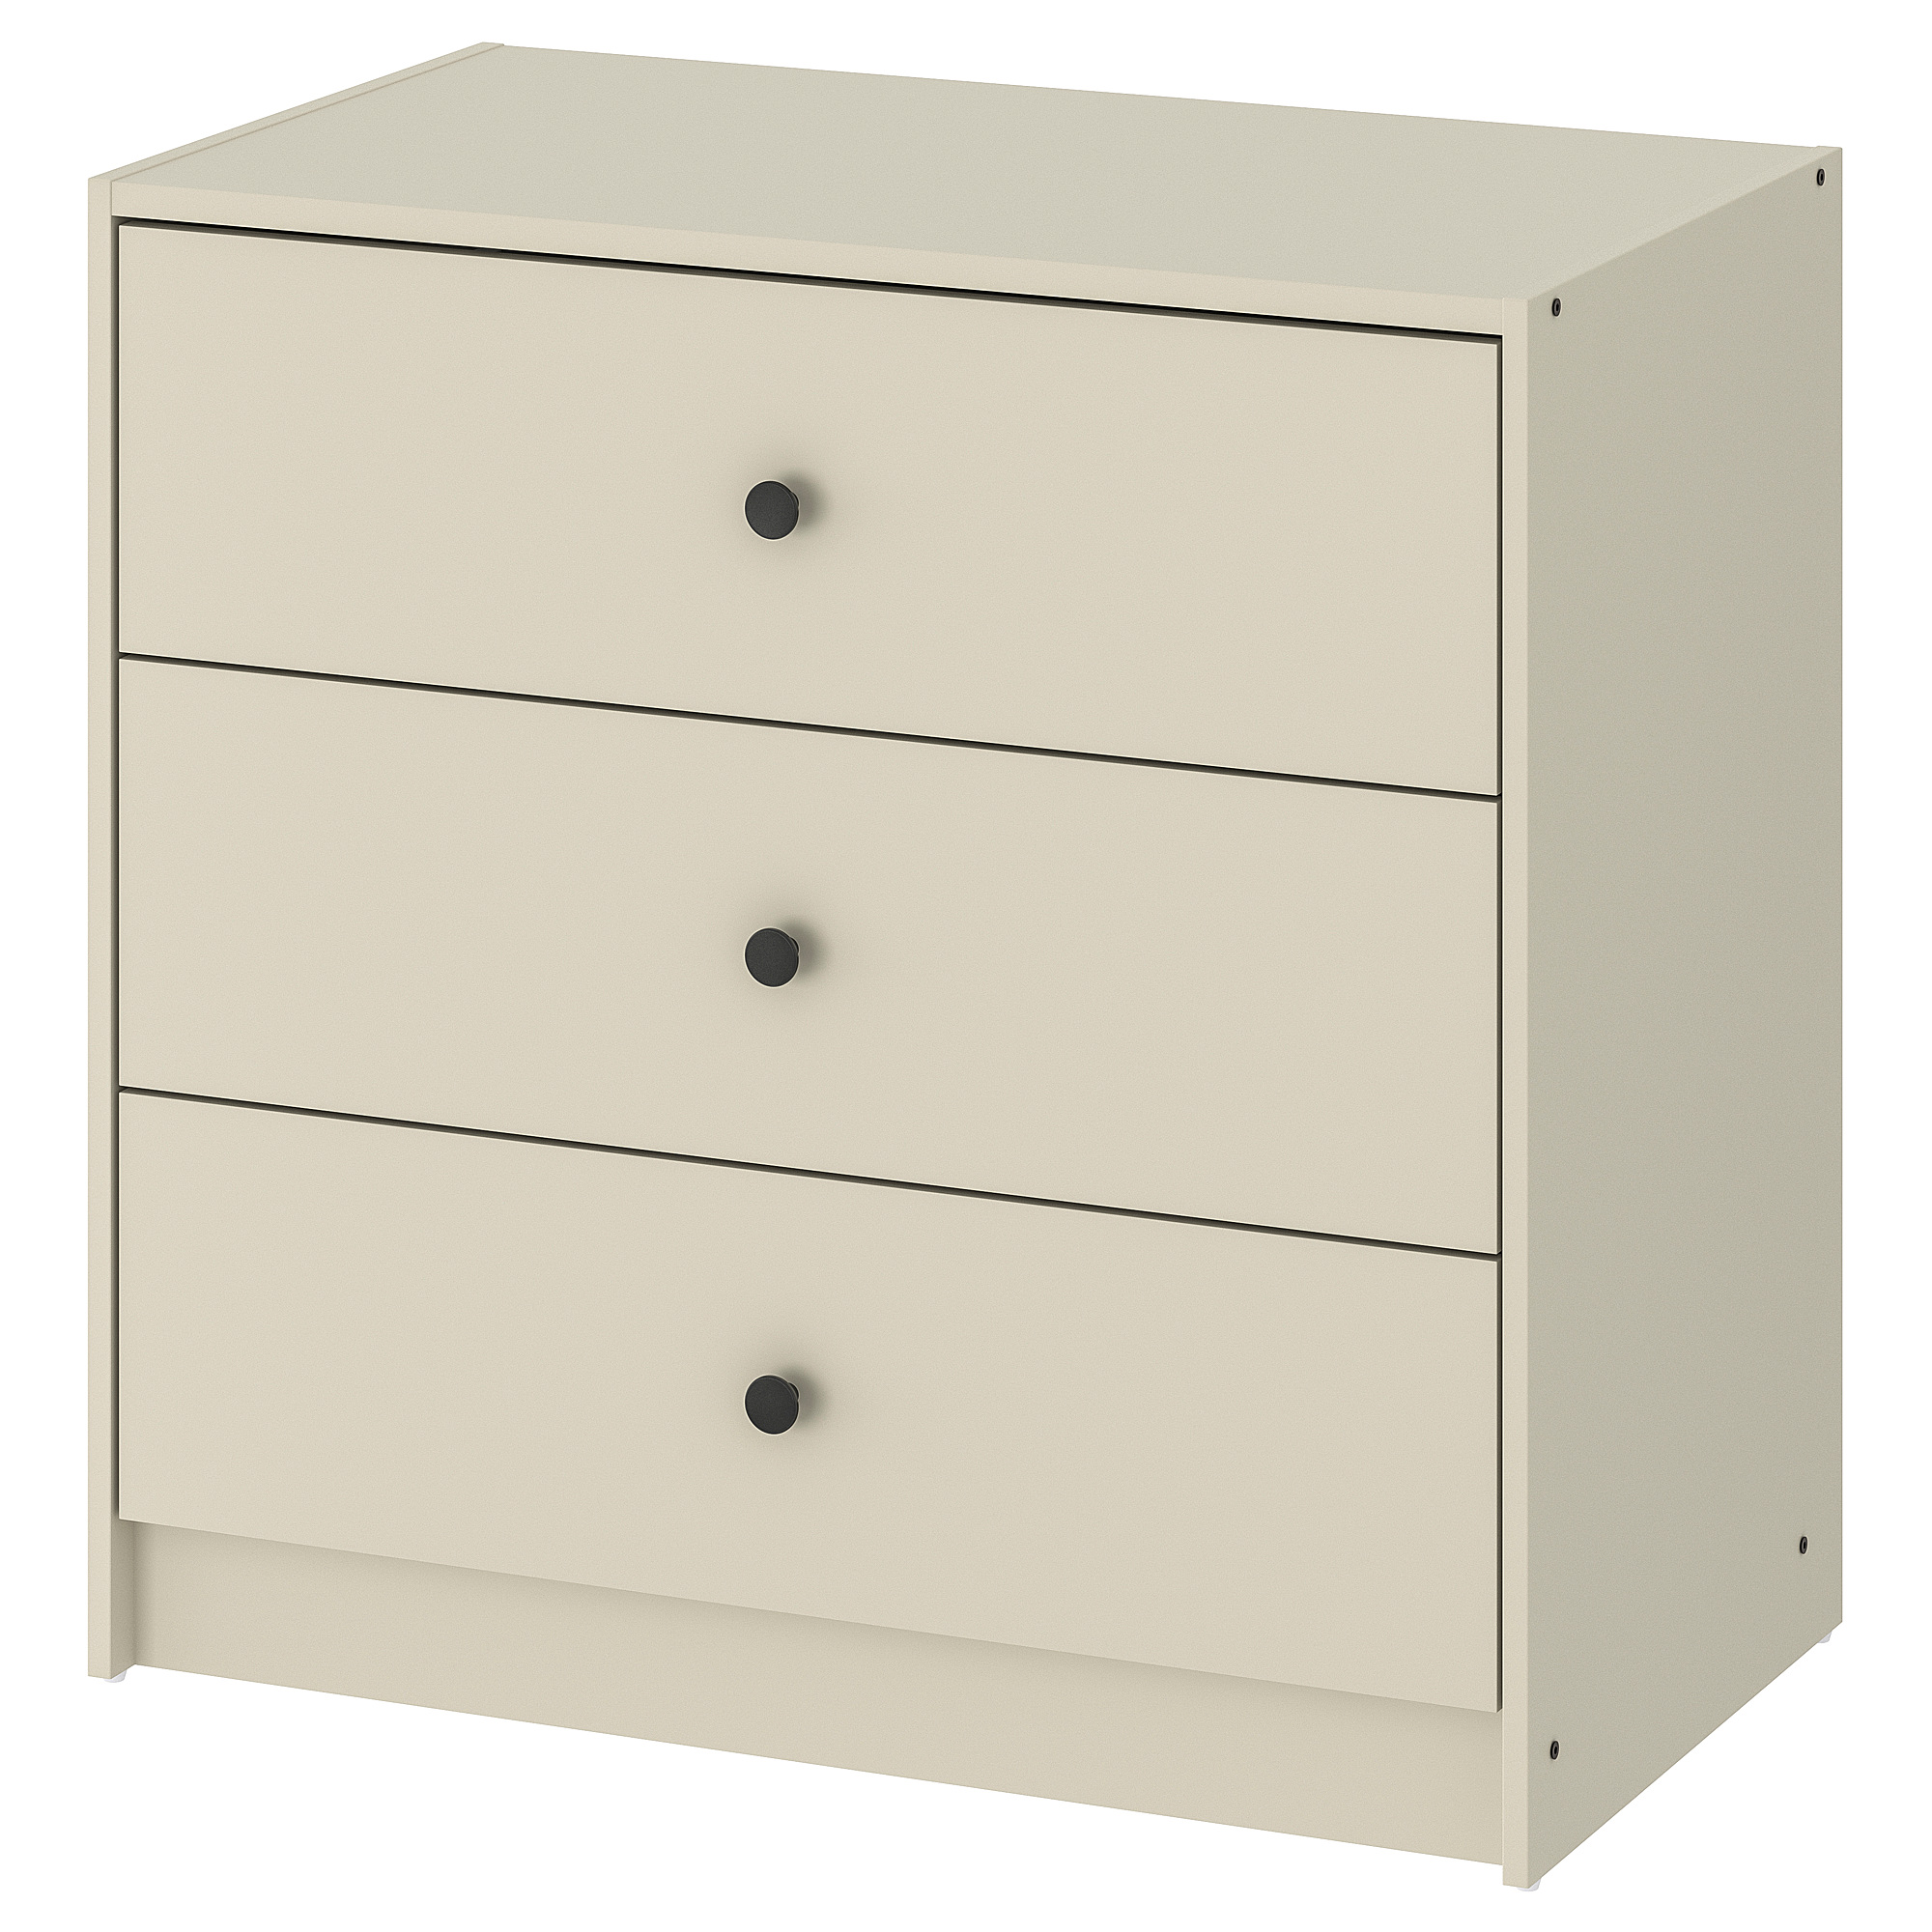 GURSKEN chest of 3 drawers